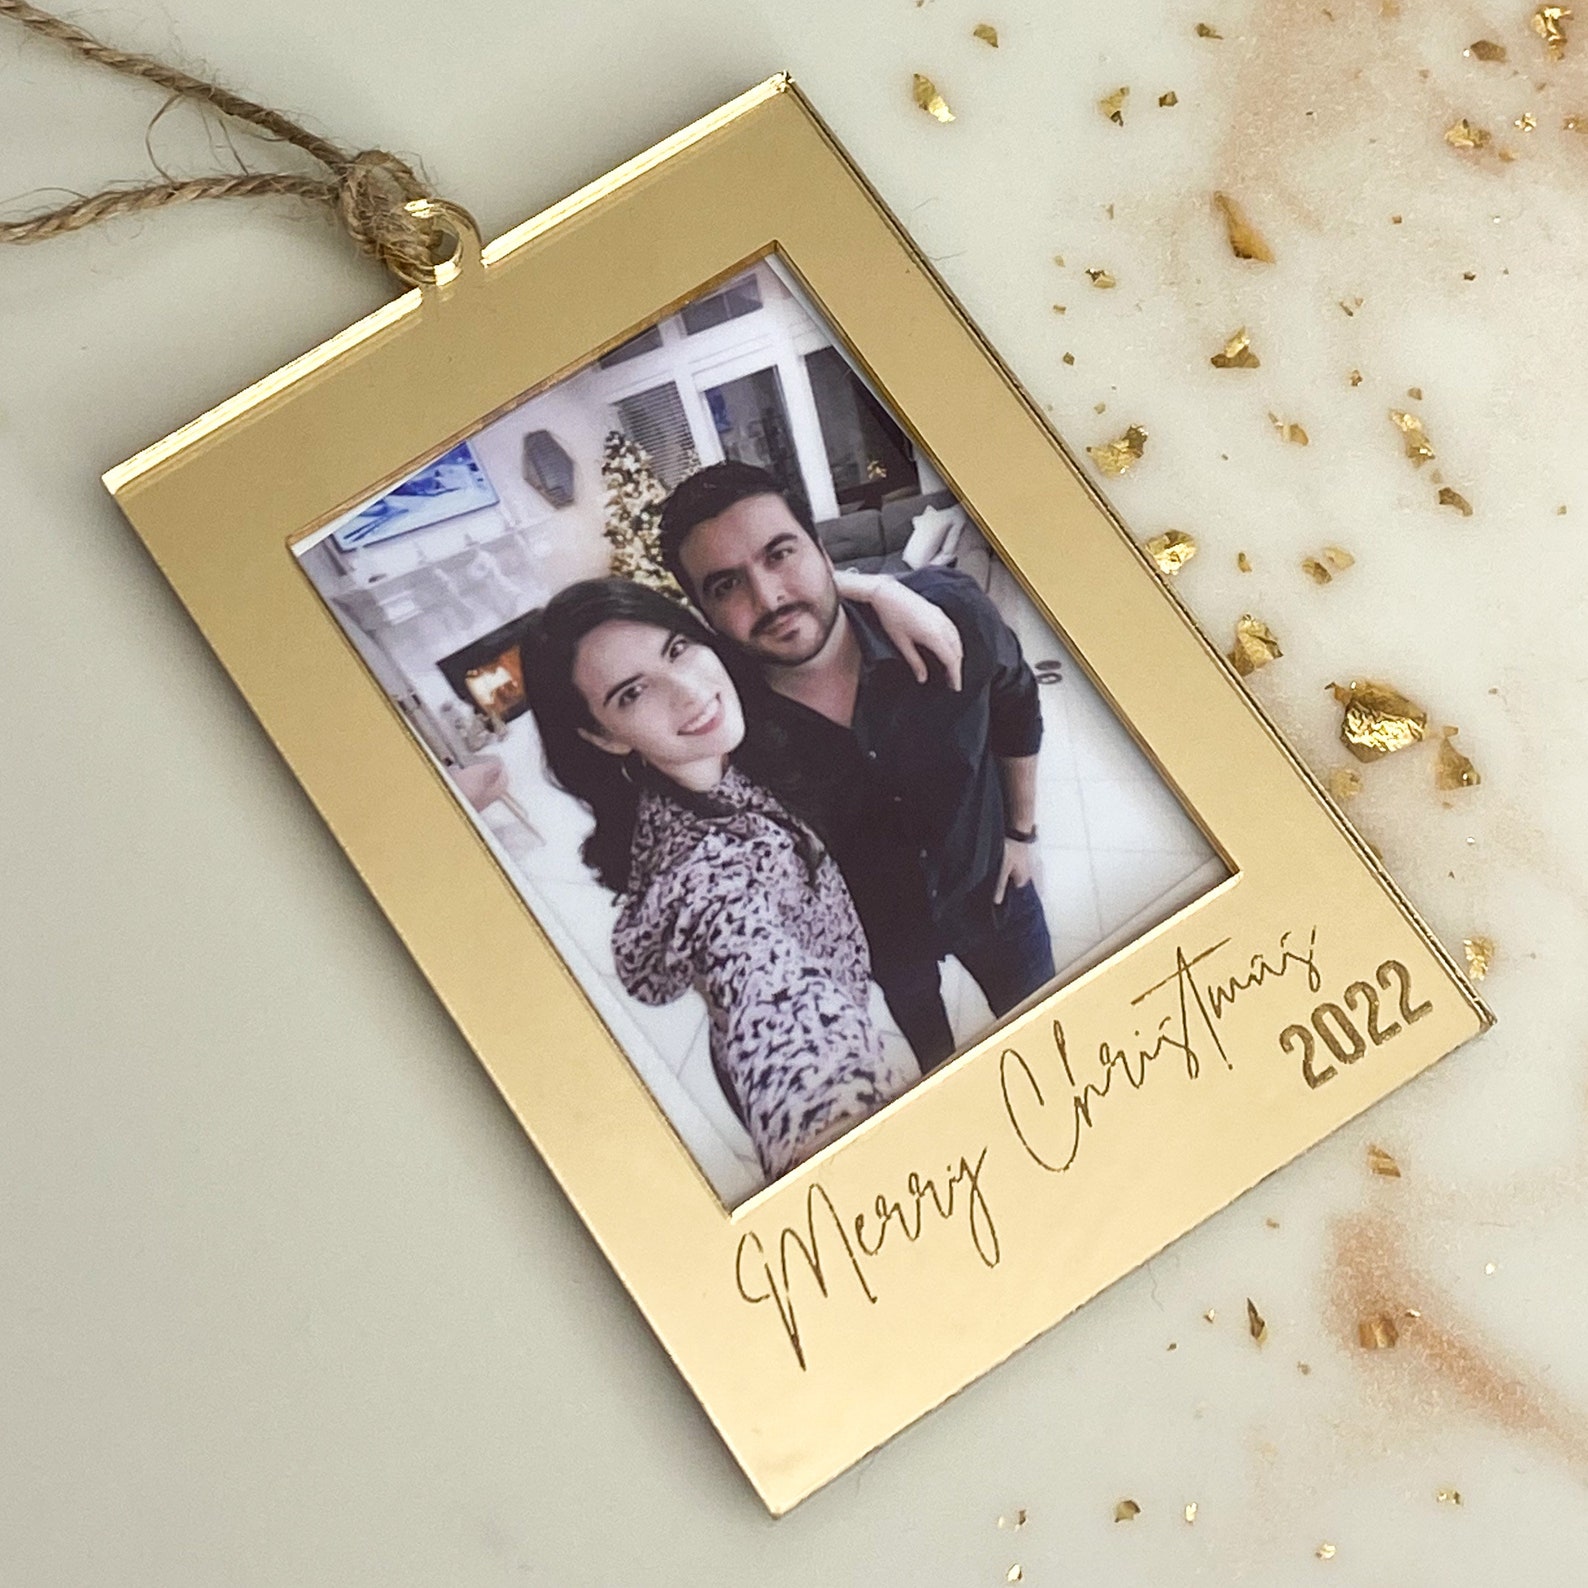 Personalized photo frame Christmas ornament: Best gifts under $15